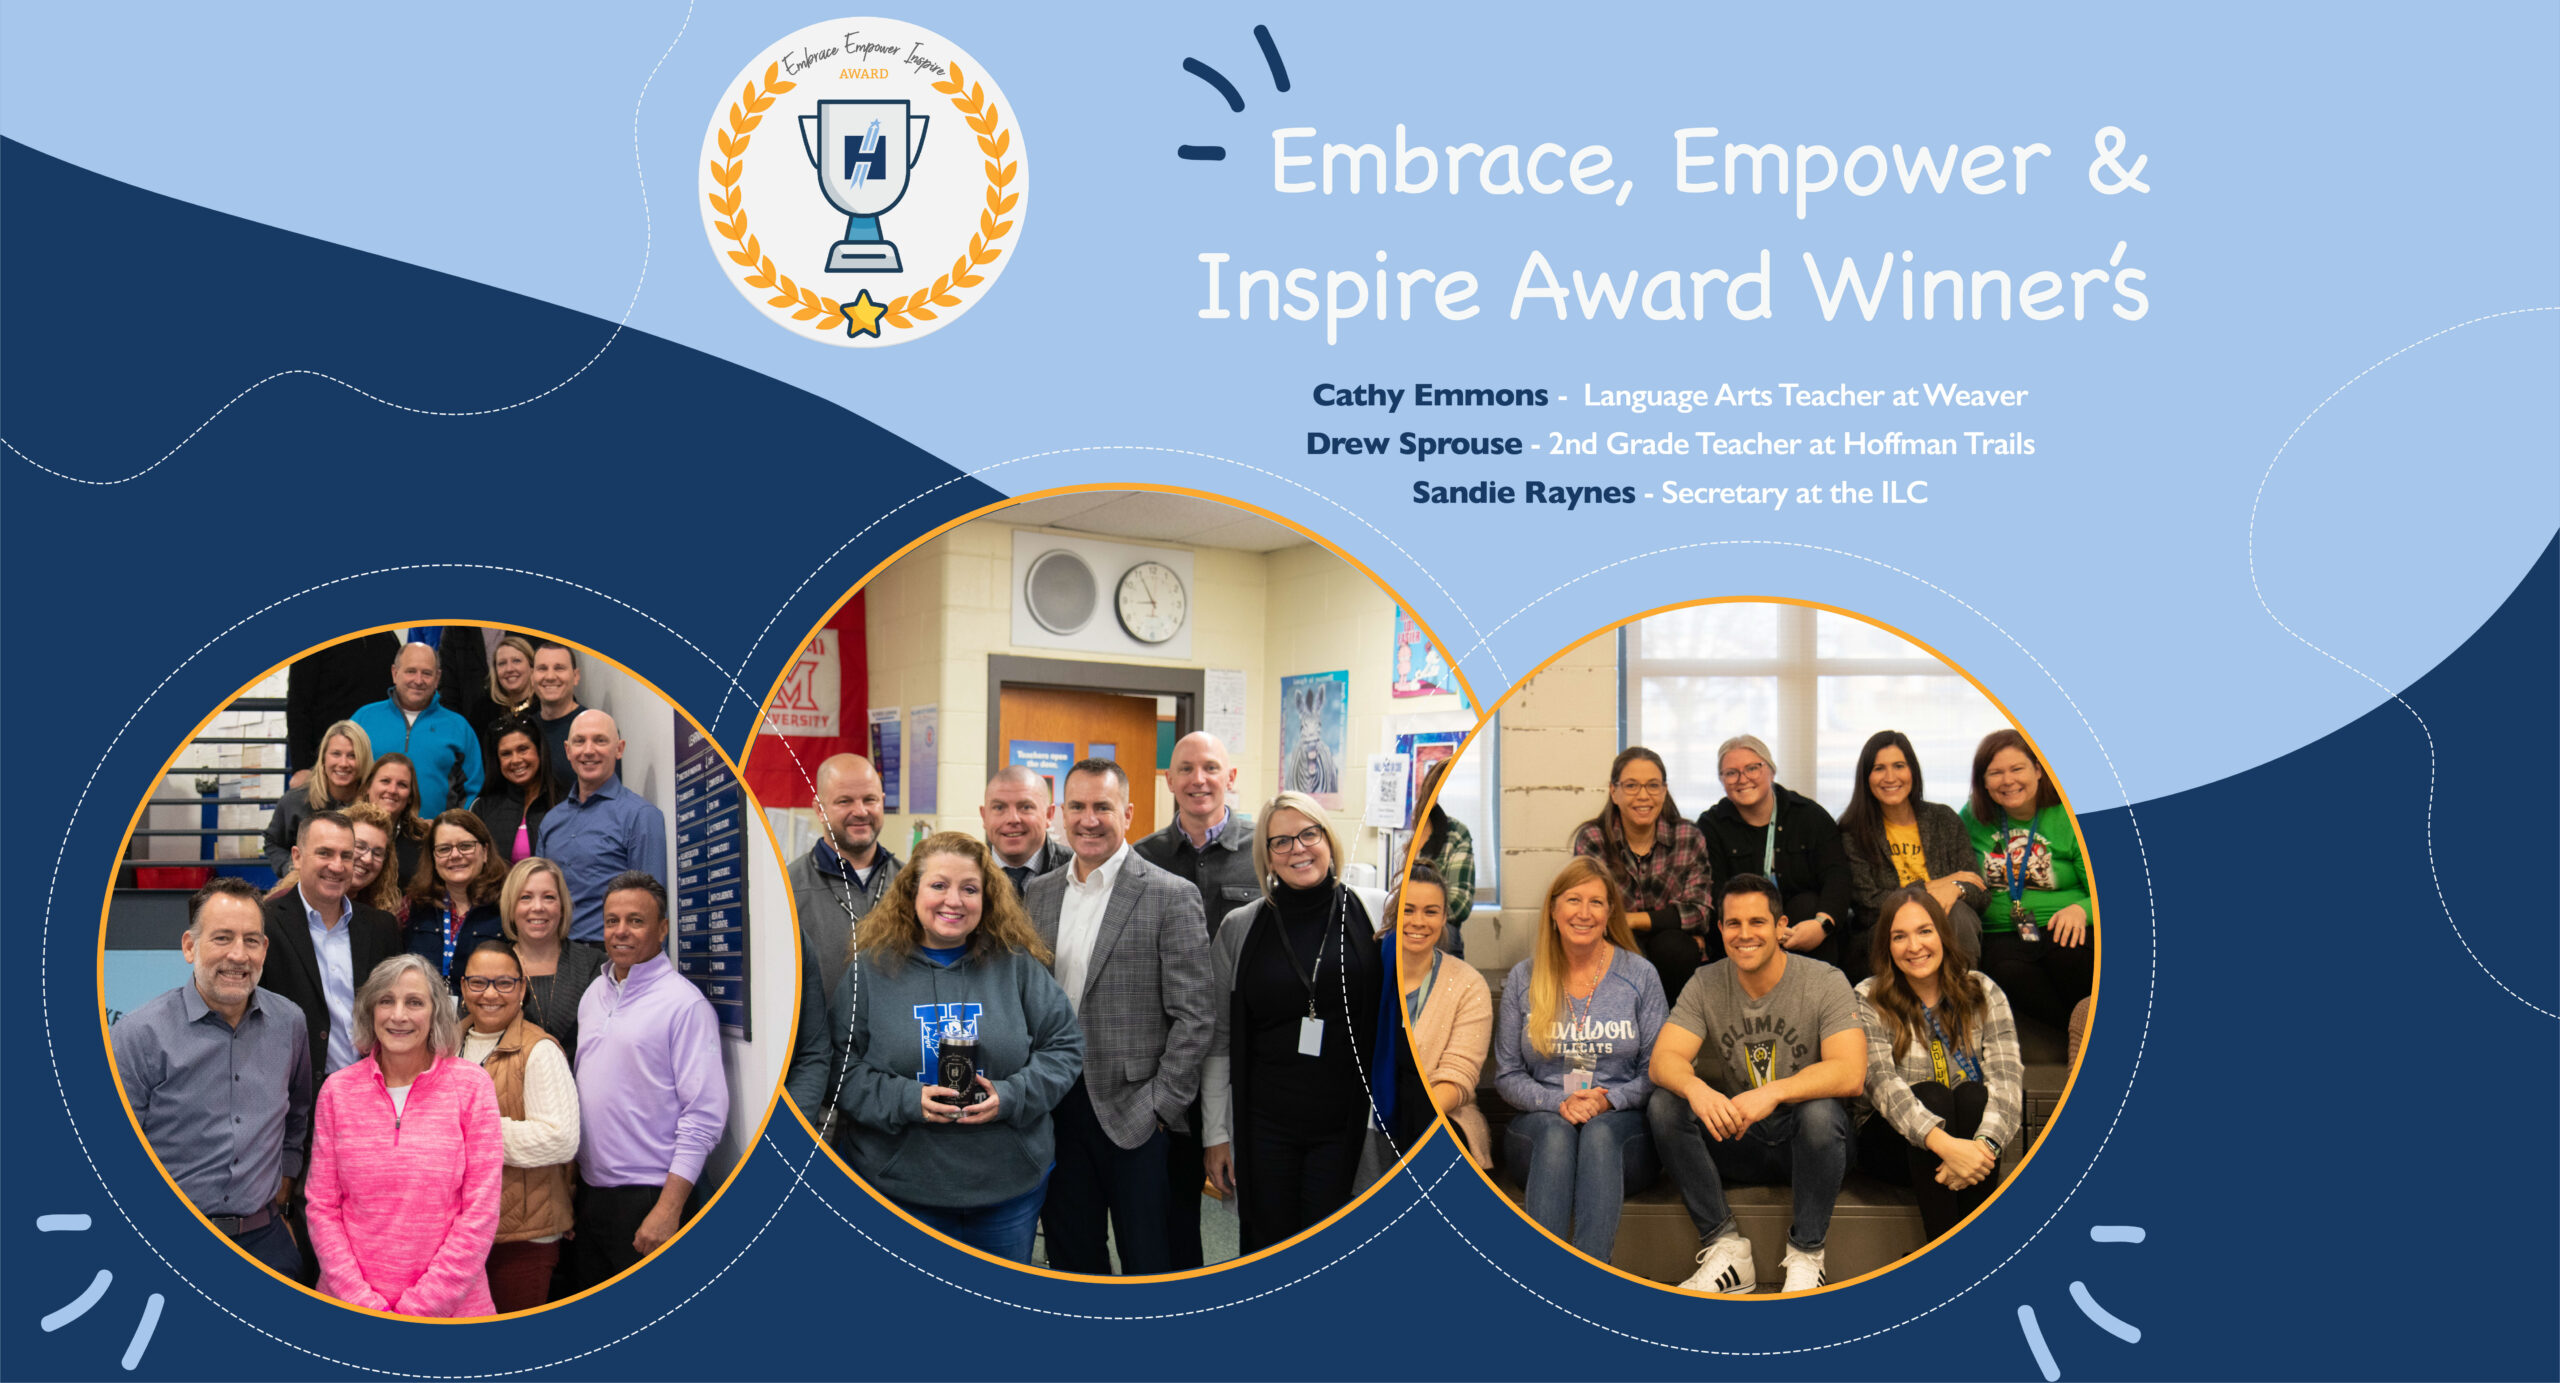 Recipients of the Embrace Empower and Inspire Award